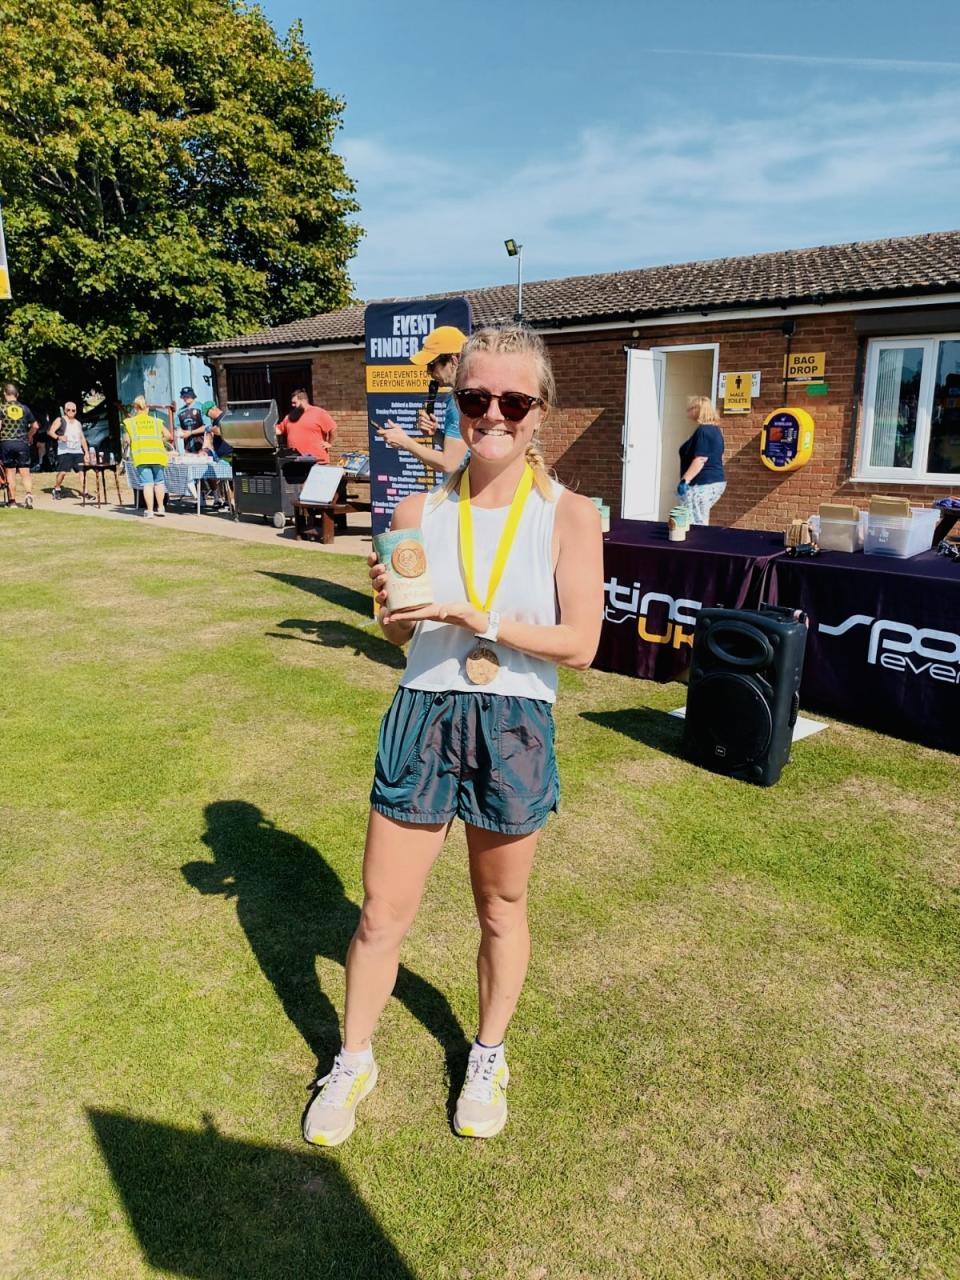 Emily Hale now eats healthily and enjoys running, pictured after winning a 5km race in Kent. (Supplied)